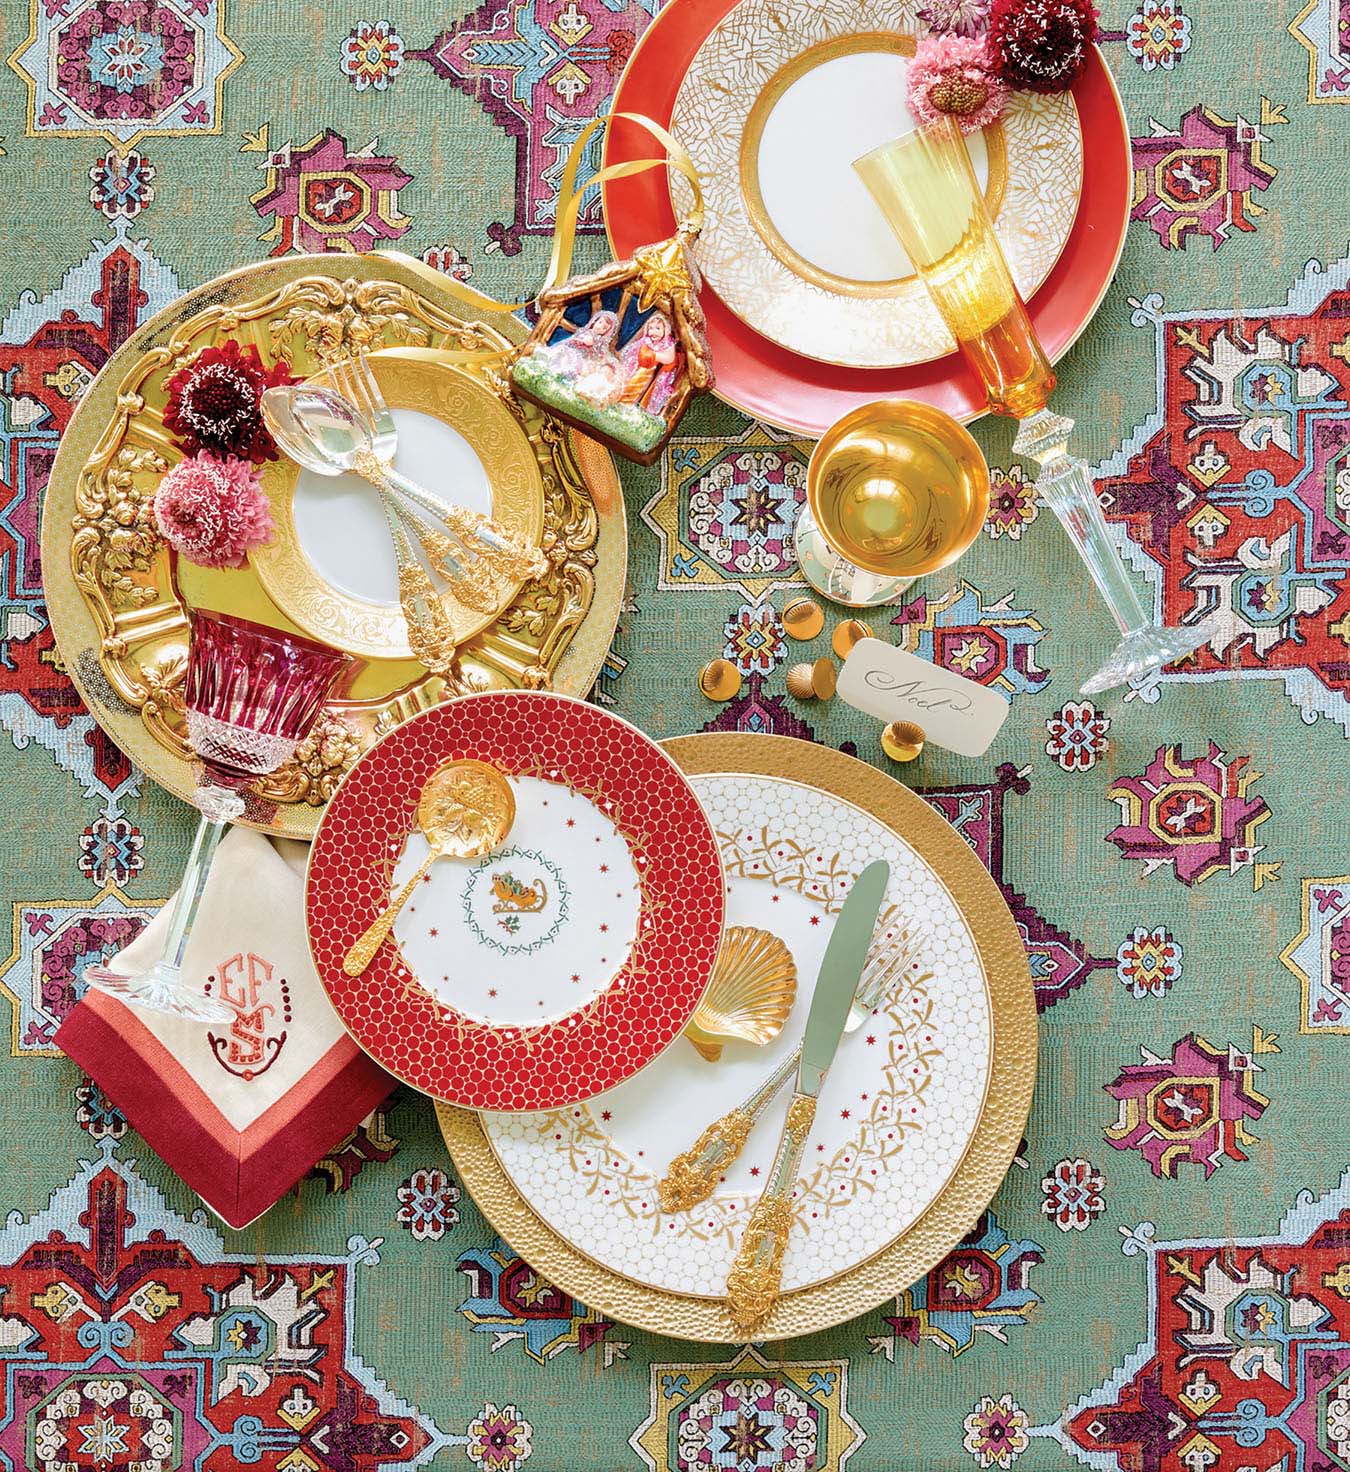 Holiday table setting in reds and golds